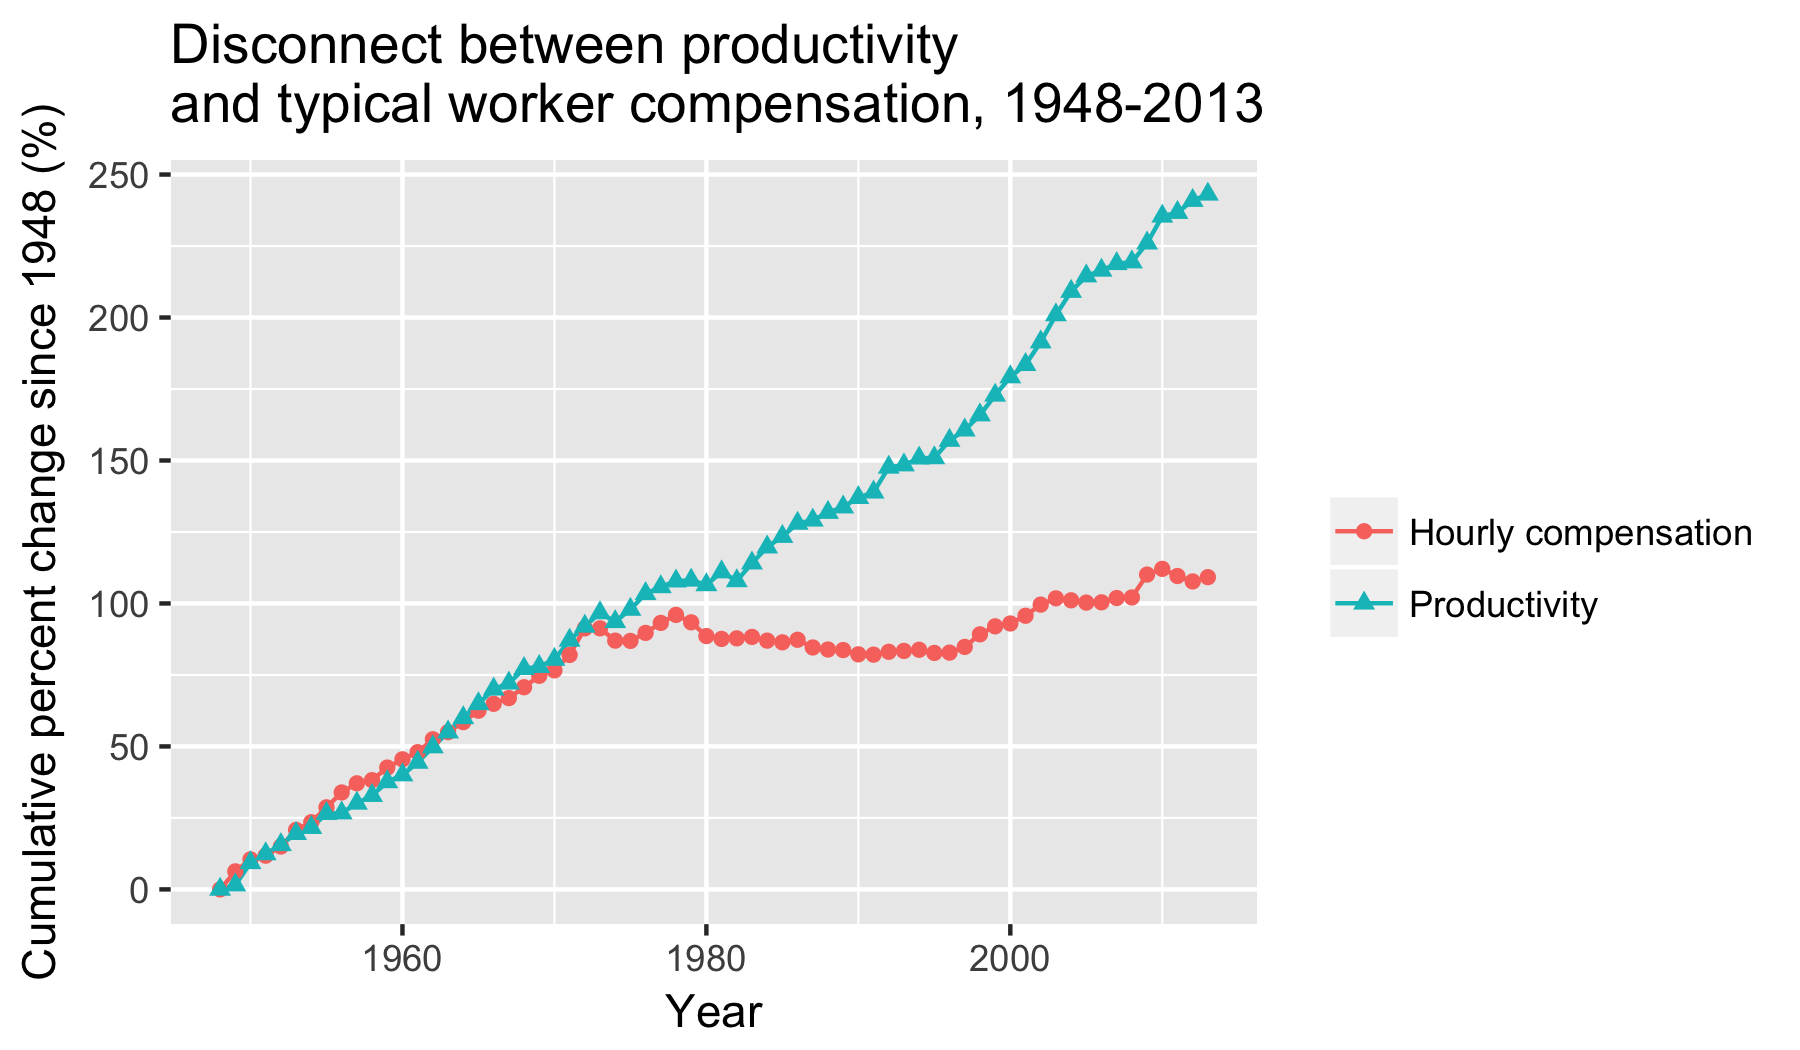 Graph showing disconnect between productivity and typical worker compensation (1948-2013)